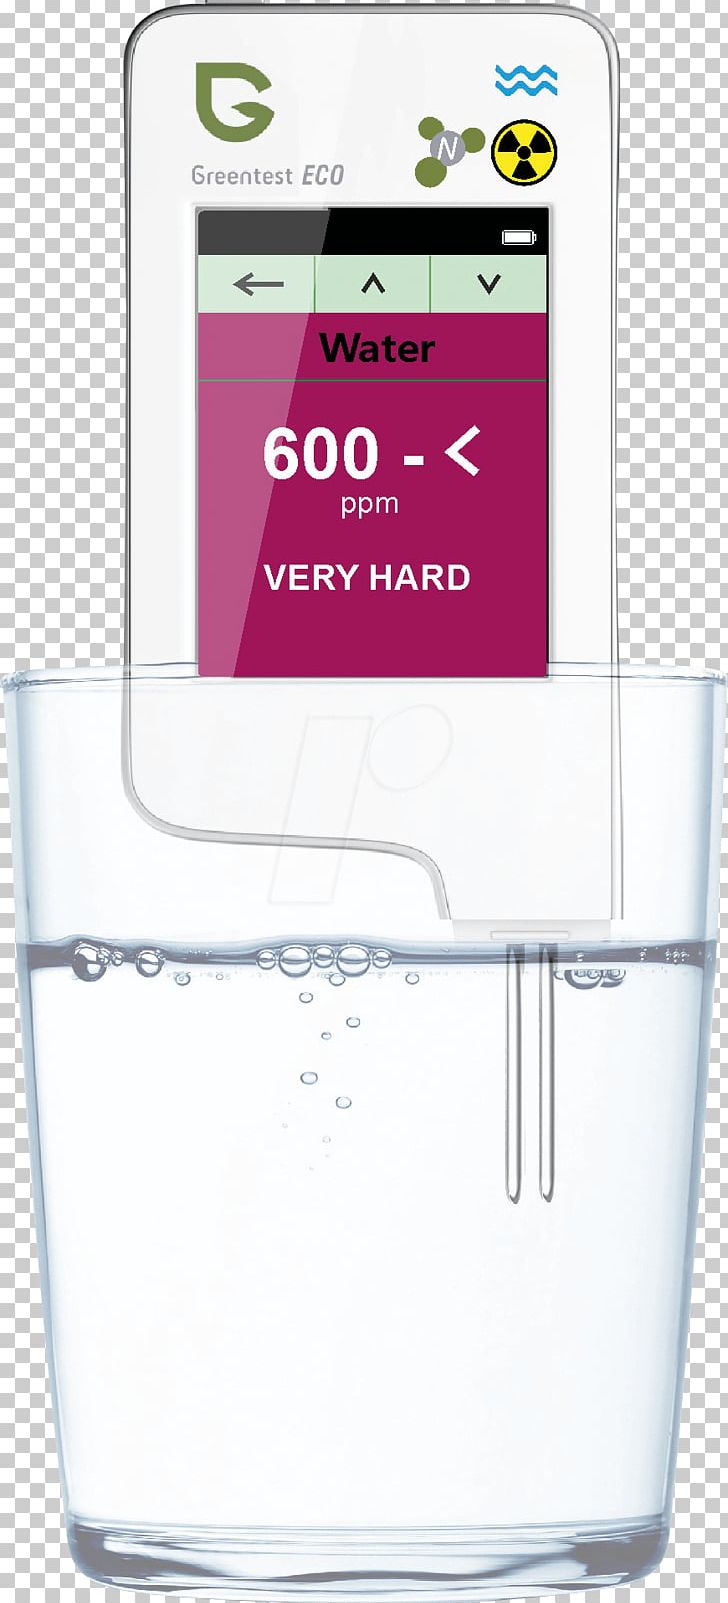 Water Filter Distilled Water Glass Drinking Water PNG, Clipart, Cdn, Cup, D 100, Distilled Water, Drinking Free PNG Download